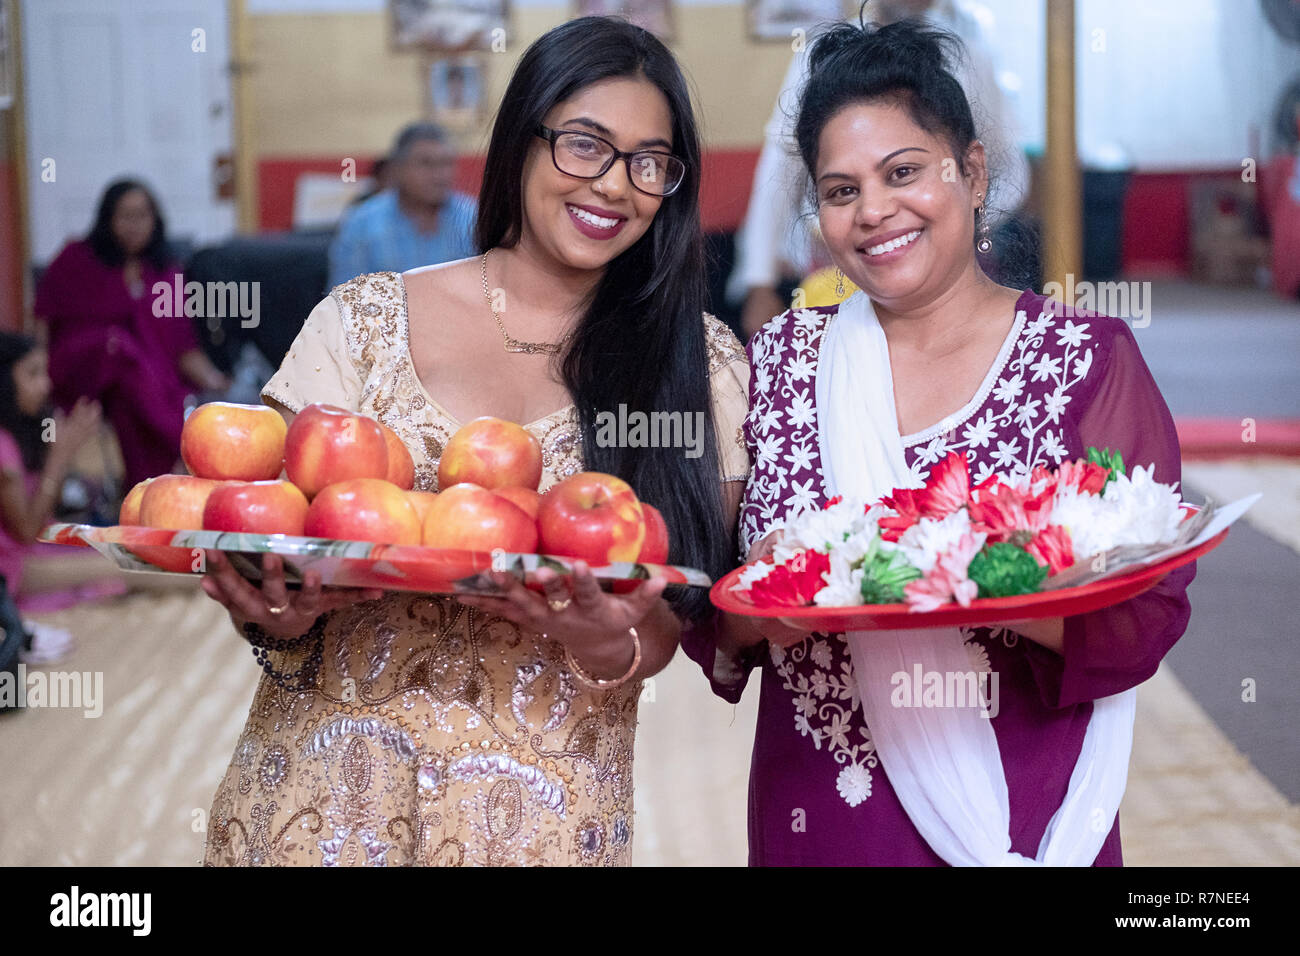 A lookalike mother and daughter pose for a photo at a Hindu temple prior to leaving offerings to the deities. In Queens, New york. Stock Photo